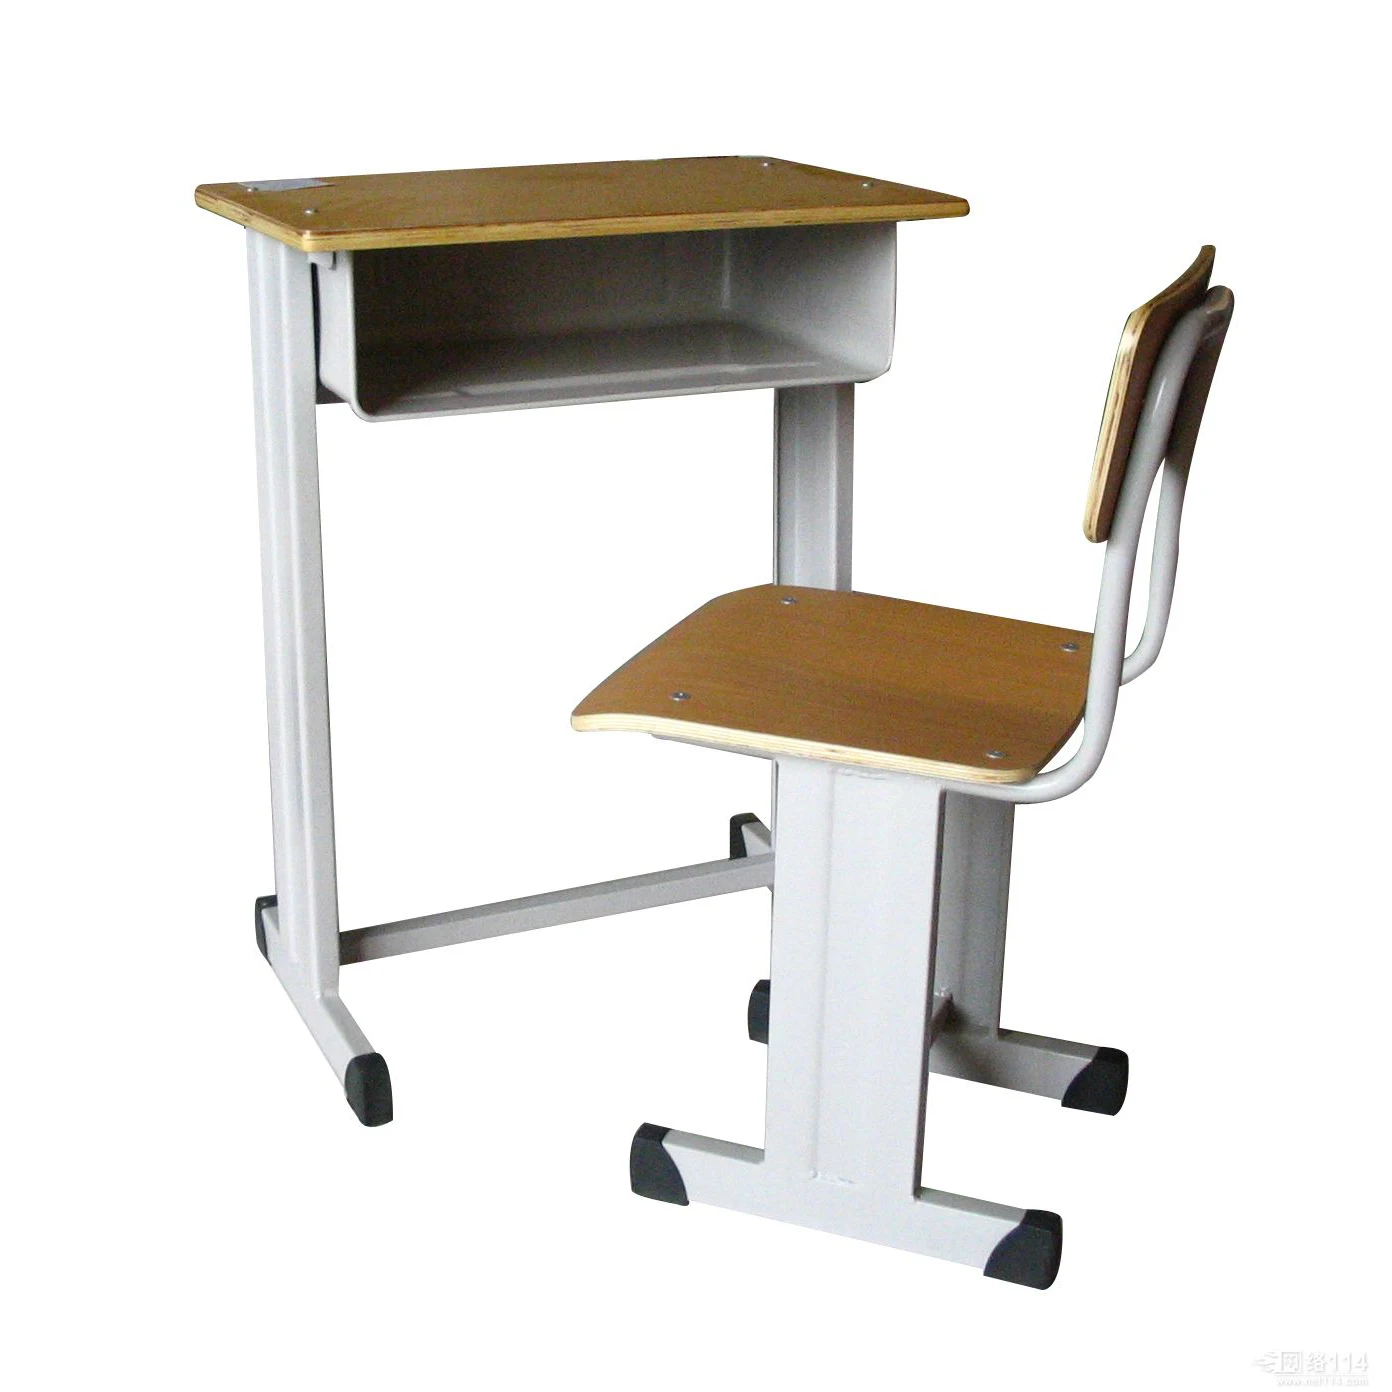 Cbrl Compact Middle School Furniture Abs Edge Top Board Lift